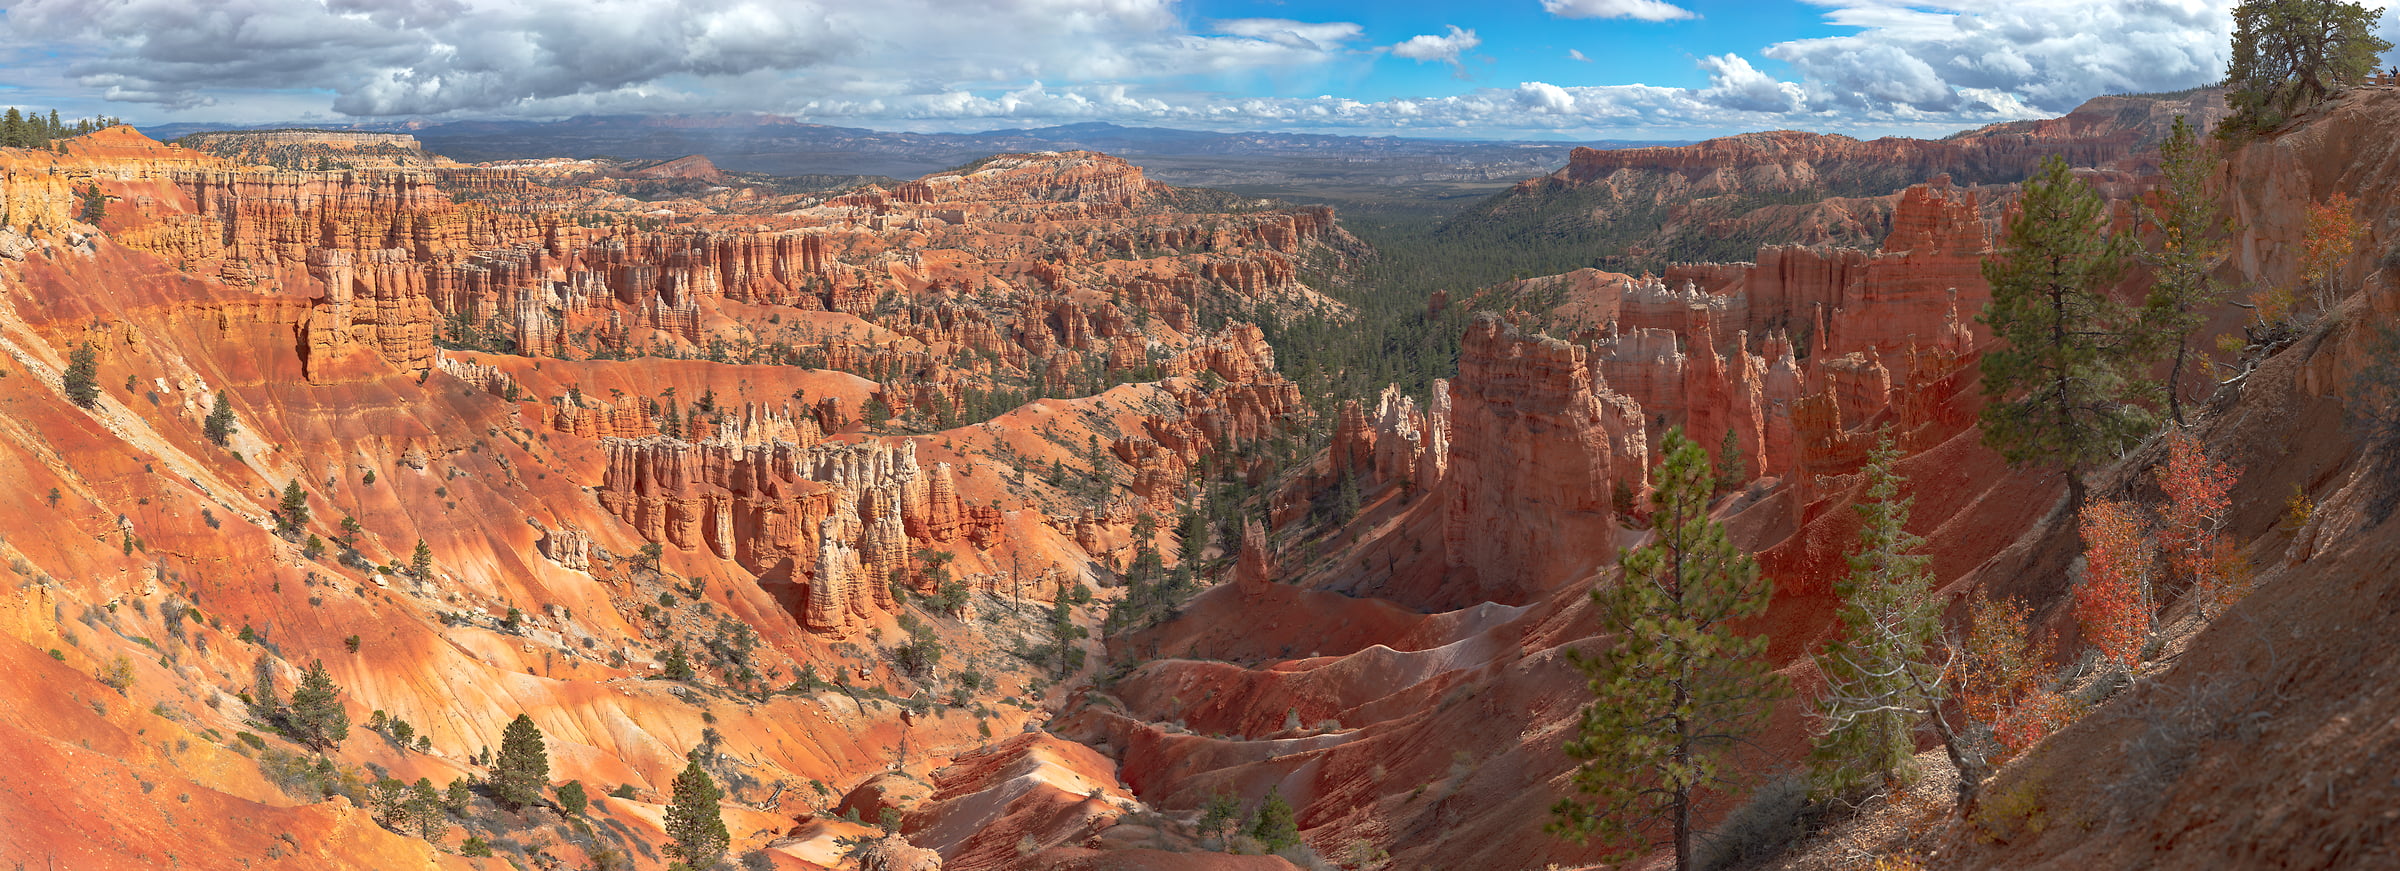 5,279 megapixels! A very high resolution, large-format VAST photo print of a great American landscape; photograph created by John Freeman at Sunset Point in Bryce Canyon National Park, New Mexico